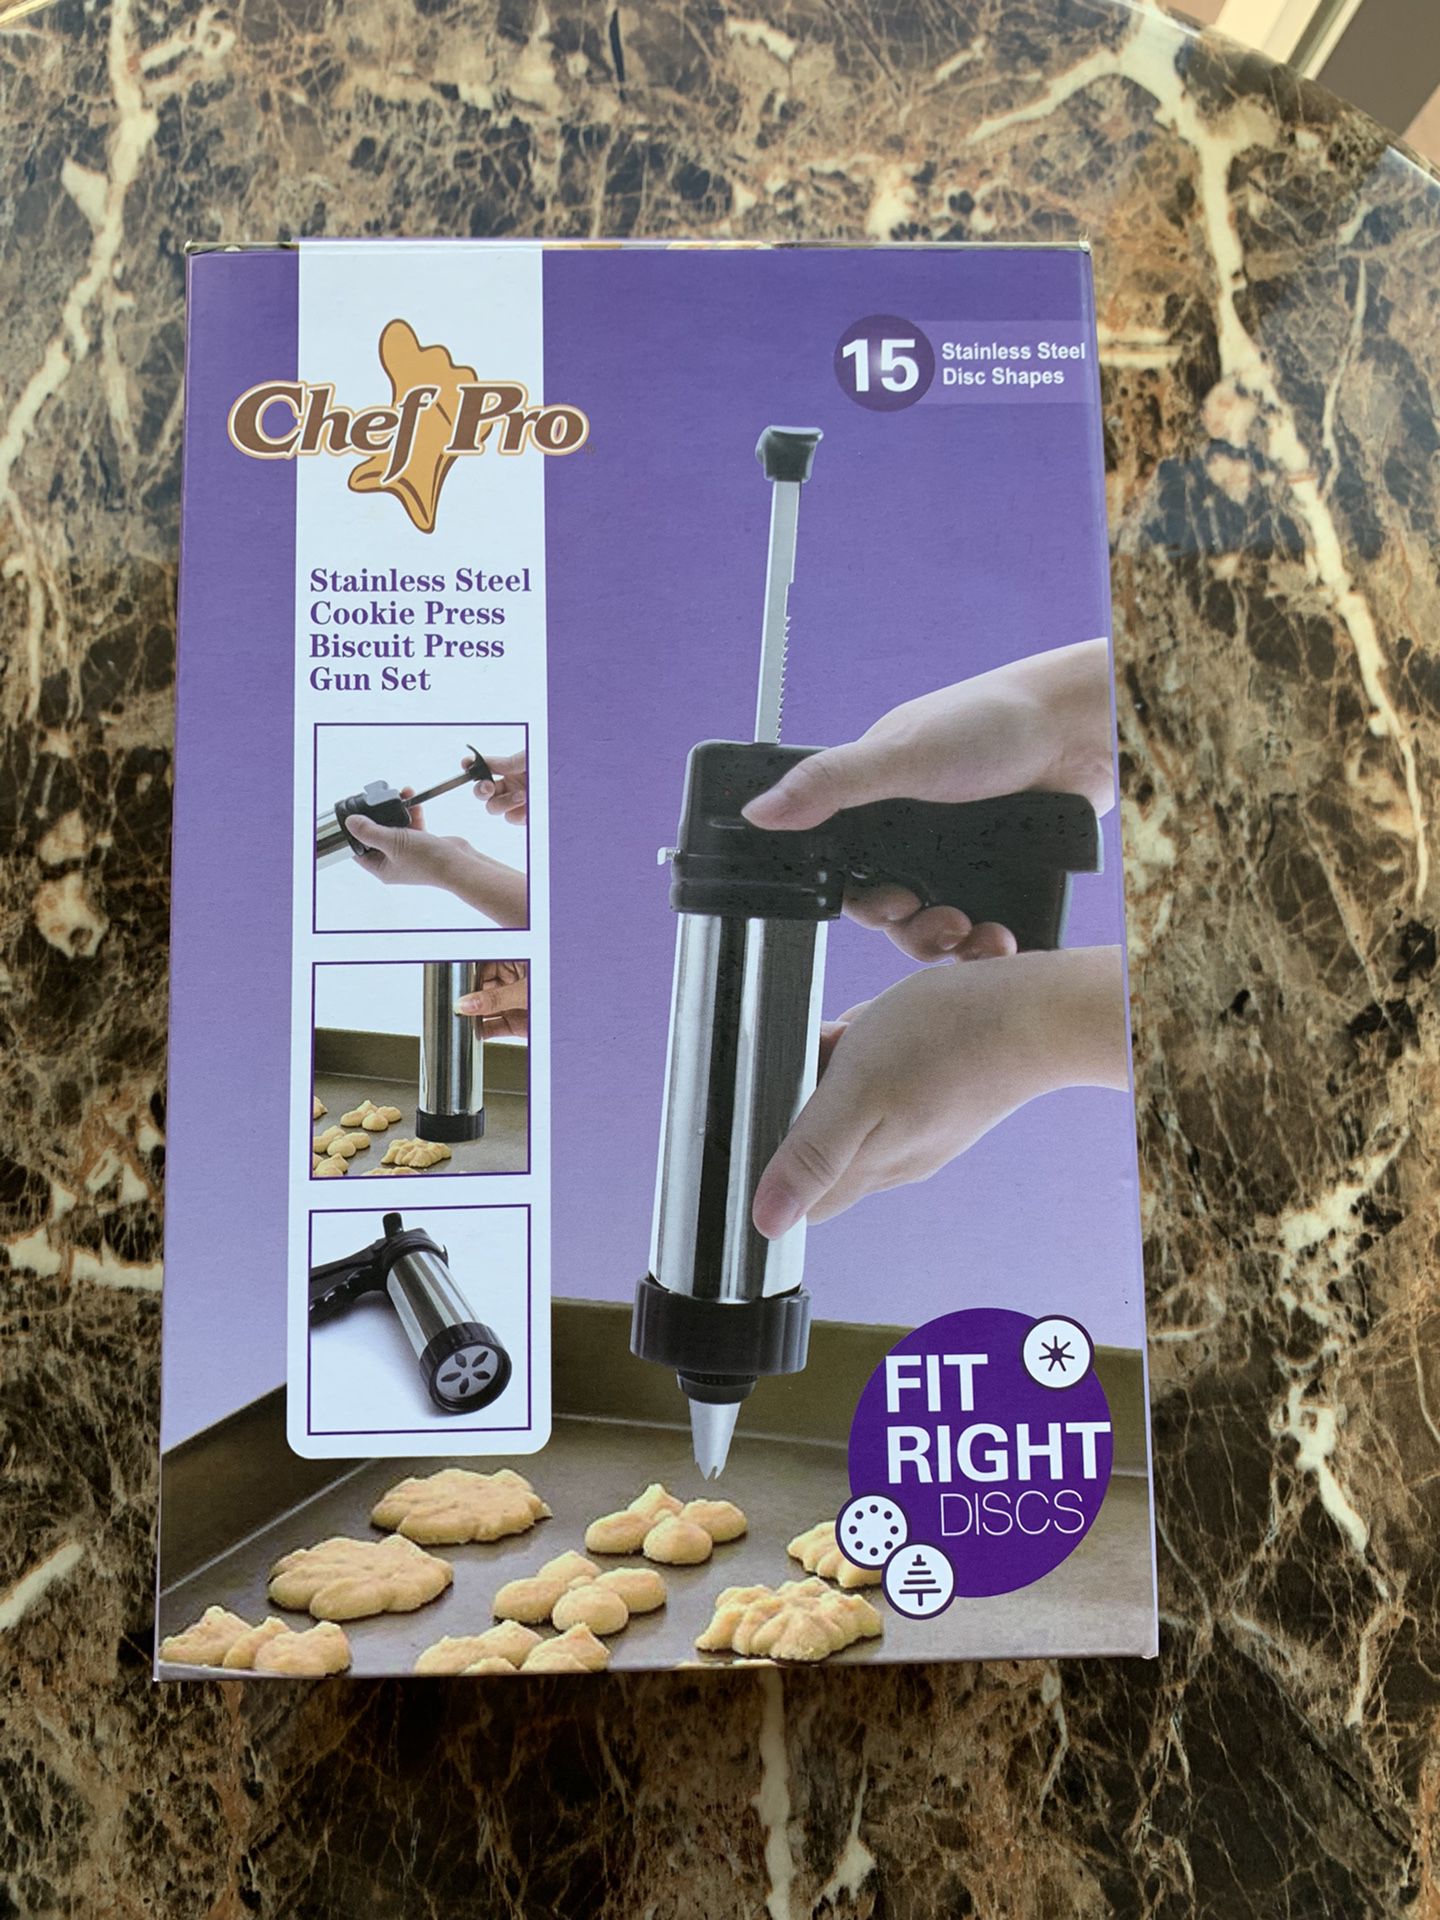 Chef pro stainless steel cookie press